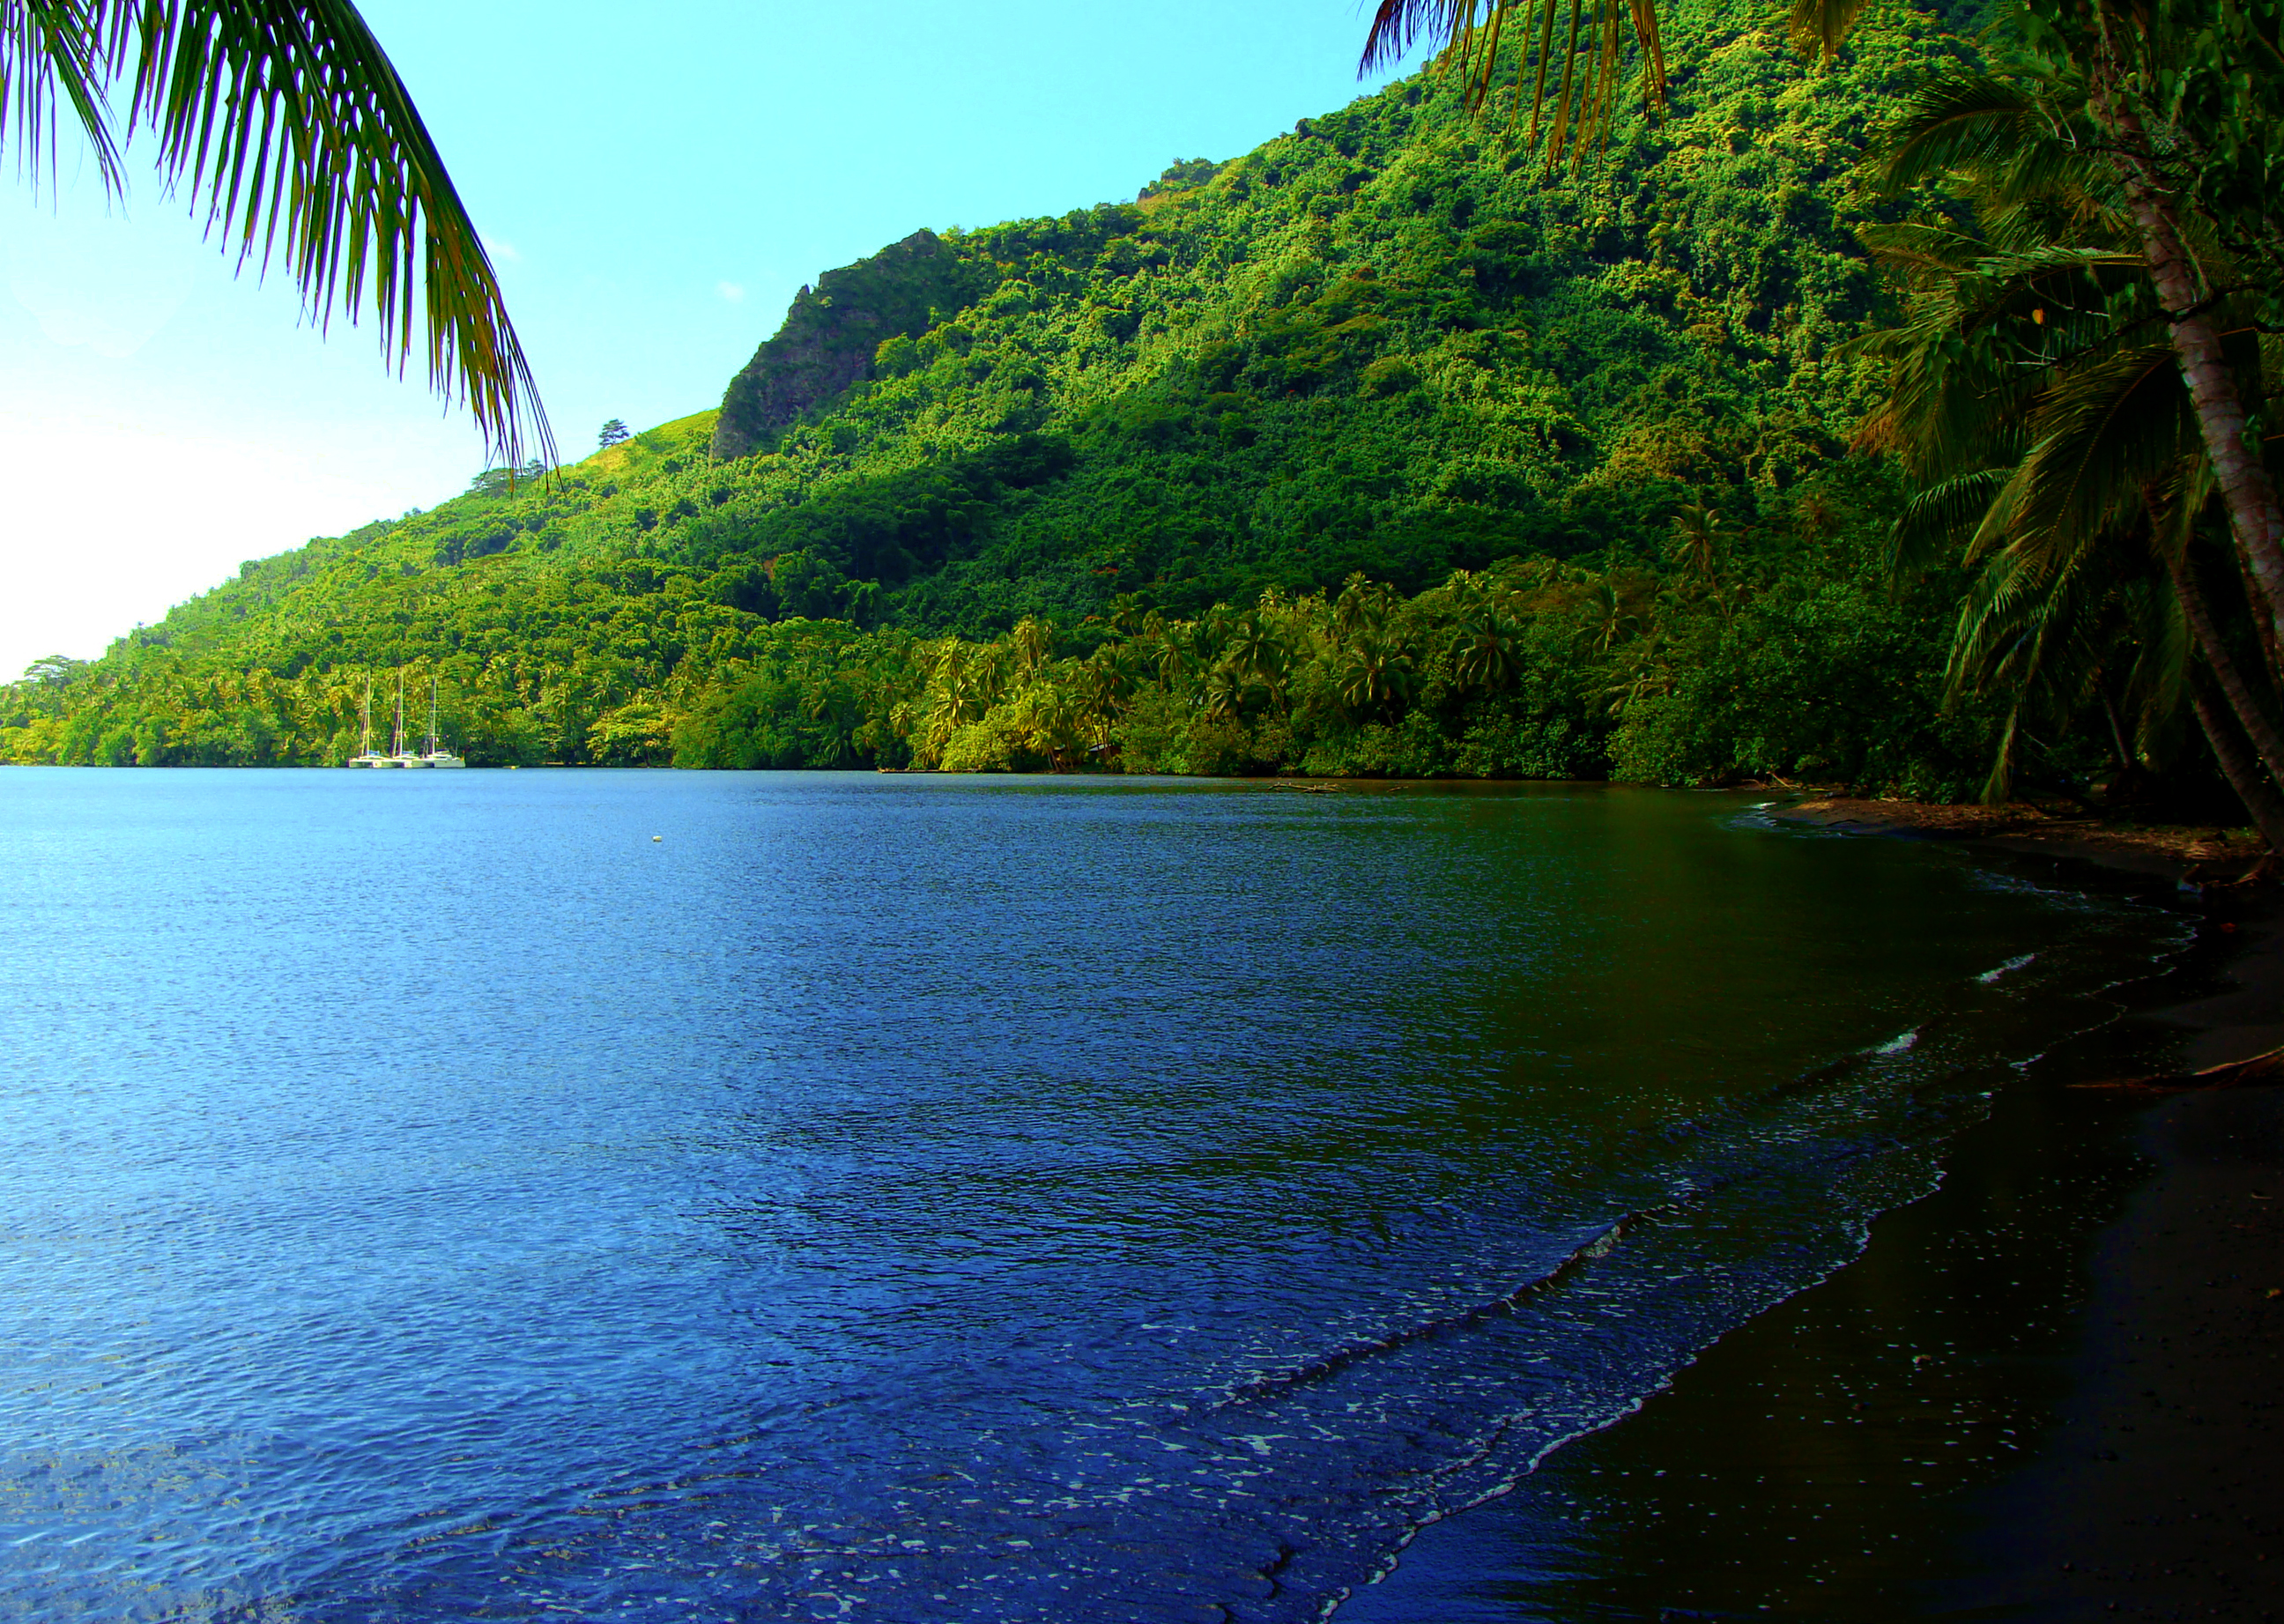 A serene coastline surrounded by breathtaking nature.